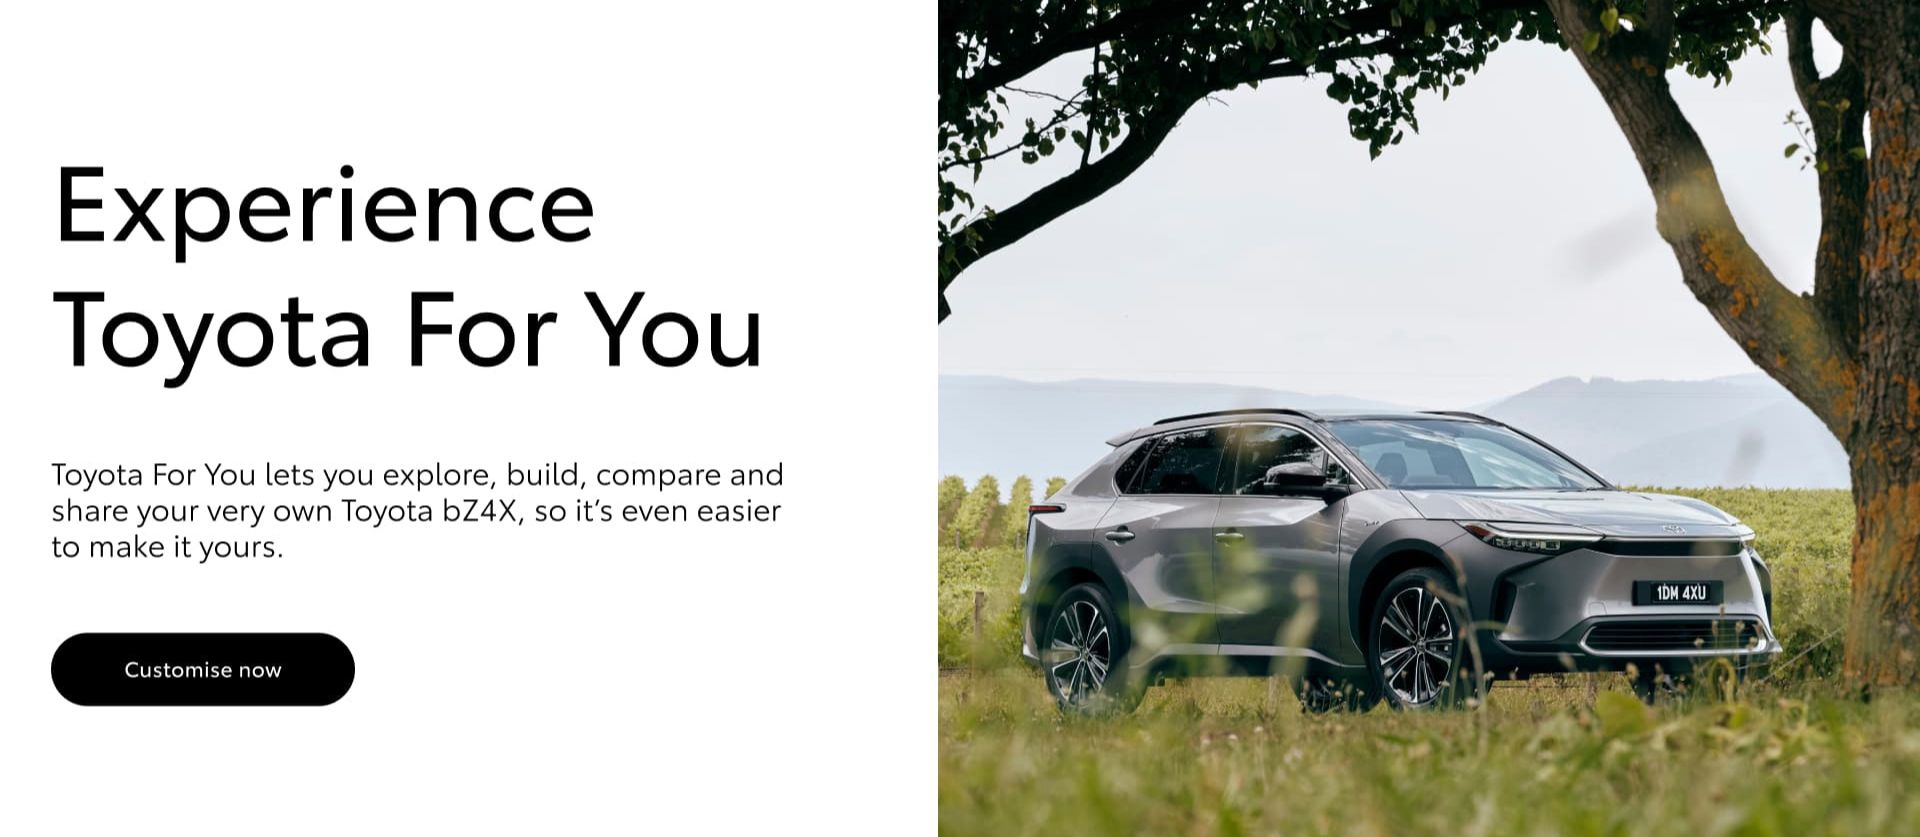 Experience Toyota For You